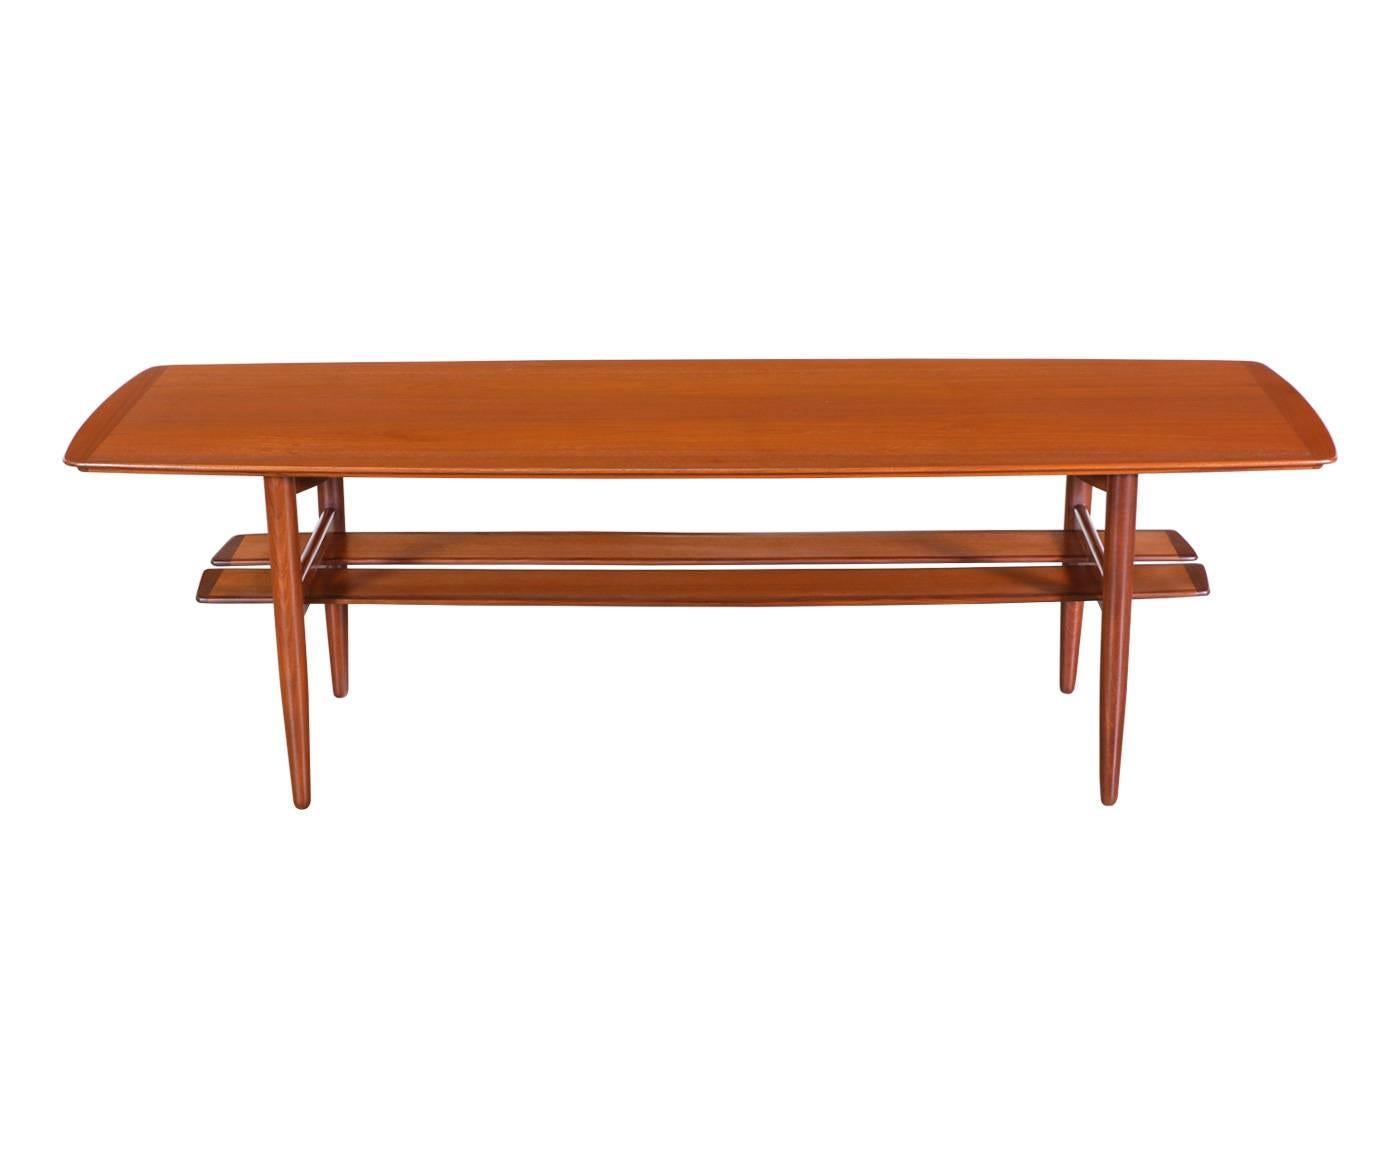 Designer: H.W. Klein
Manufacturer: Bramin Mobler
Period/Style: Danish Modern
Country: Denmark
Date: 1960’s

Dimensions: 19.5″H x 64.75″L x 21.5″W
Materials: Teak
Condition: Excellent – Newly Refinished
Number of Items: 1
ID Number: 2837